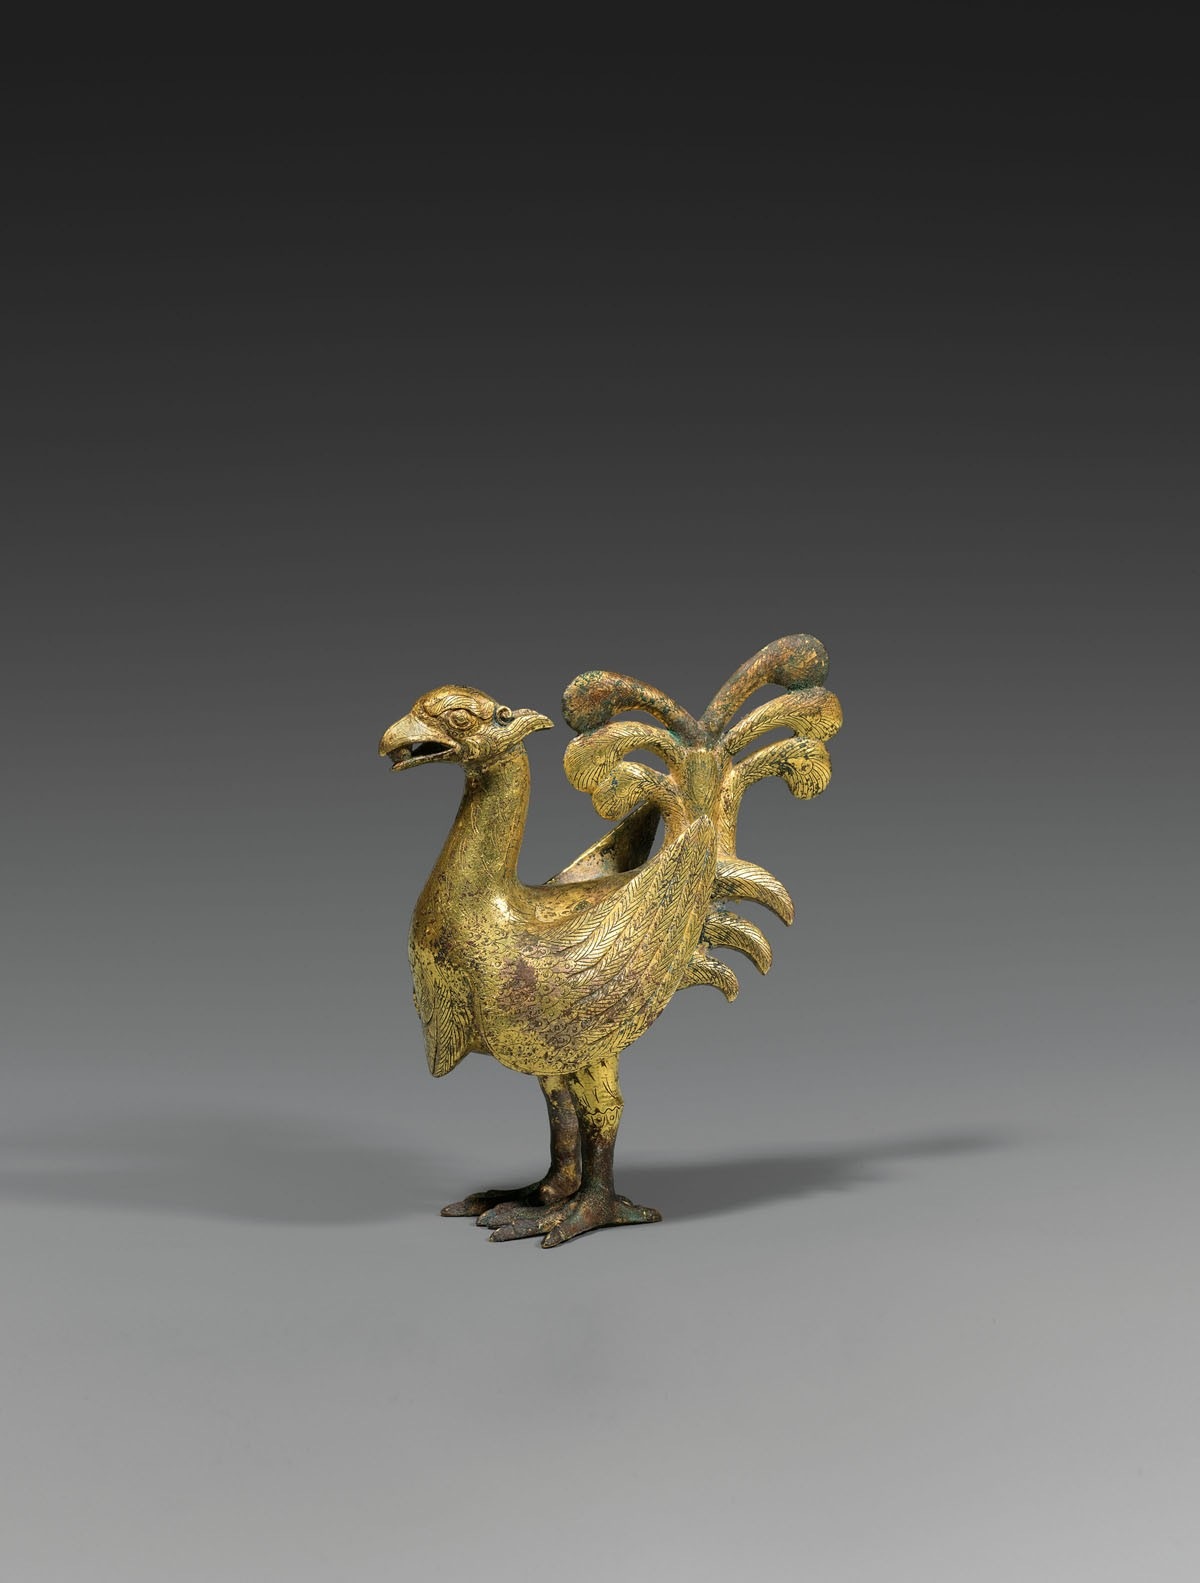 A gilt bronze figure of a phoenix, Western Han Dynasty (206 B.C. – A.D. 8). Height 4 11⁄16 inches (11.9 cm), in the exhibition Ancient Chinese Bronzes, J. J. Lally & Co., New York, 2011, cat. no. 20. © 2019 J.J. Lally & Co., New York